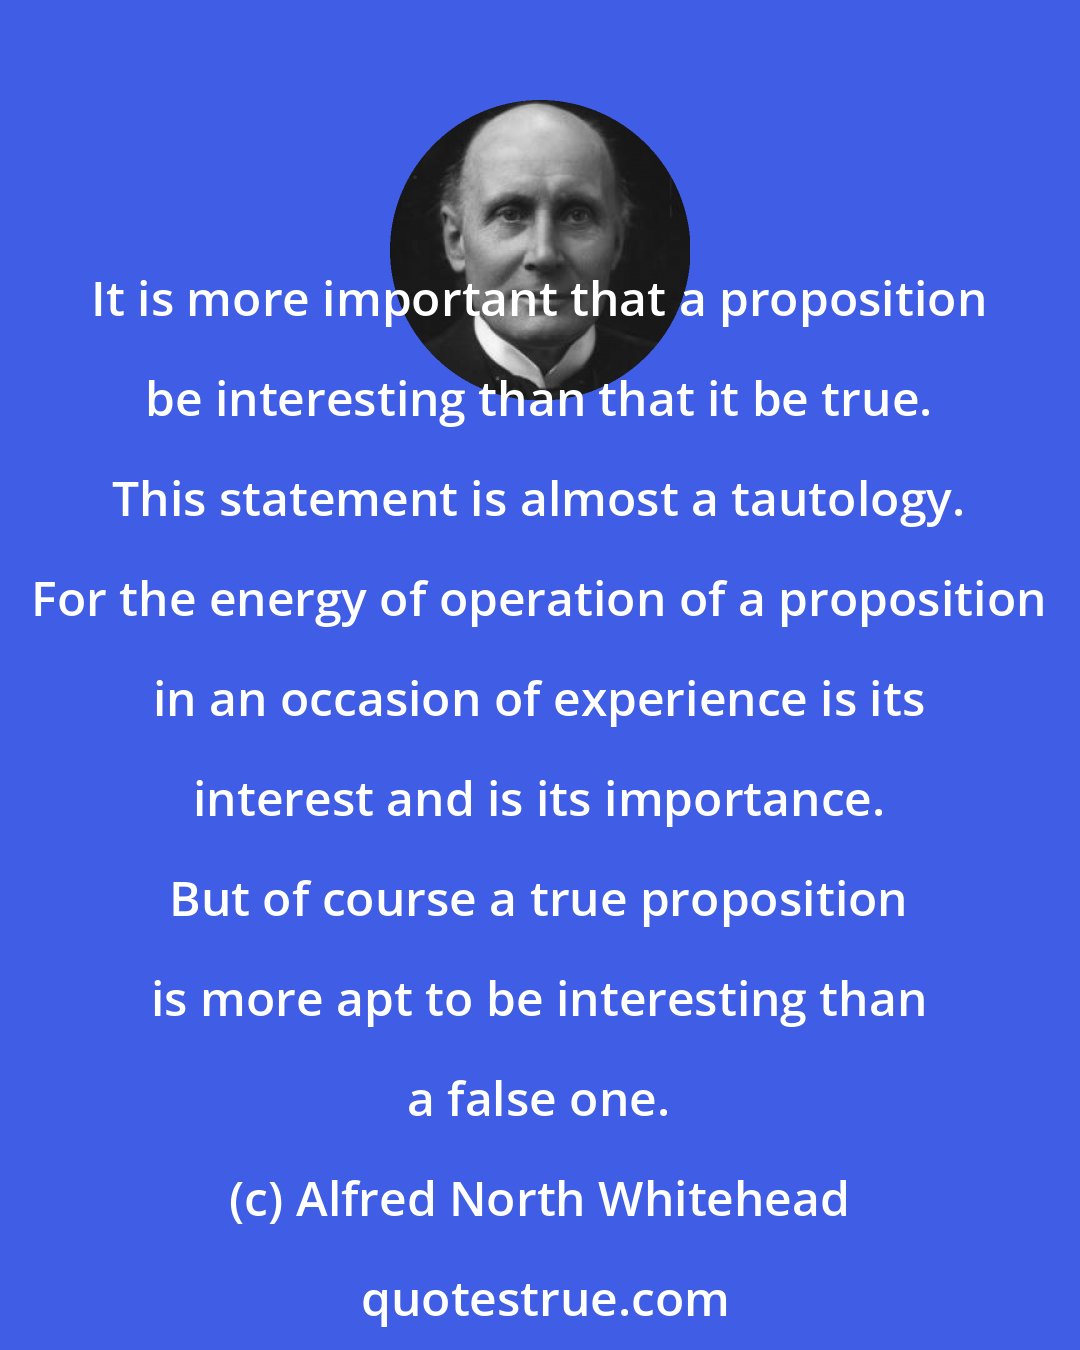 Alfred North Whitehead: It is more important that a proposition be interesting than that it be true. This statement is almost a tautology. For the energy of operation of a proposition in an occasion of experience is its interest and is its importance. But of course a true proposition is more apt to be interesting than a false one.